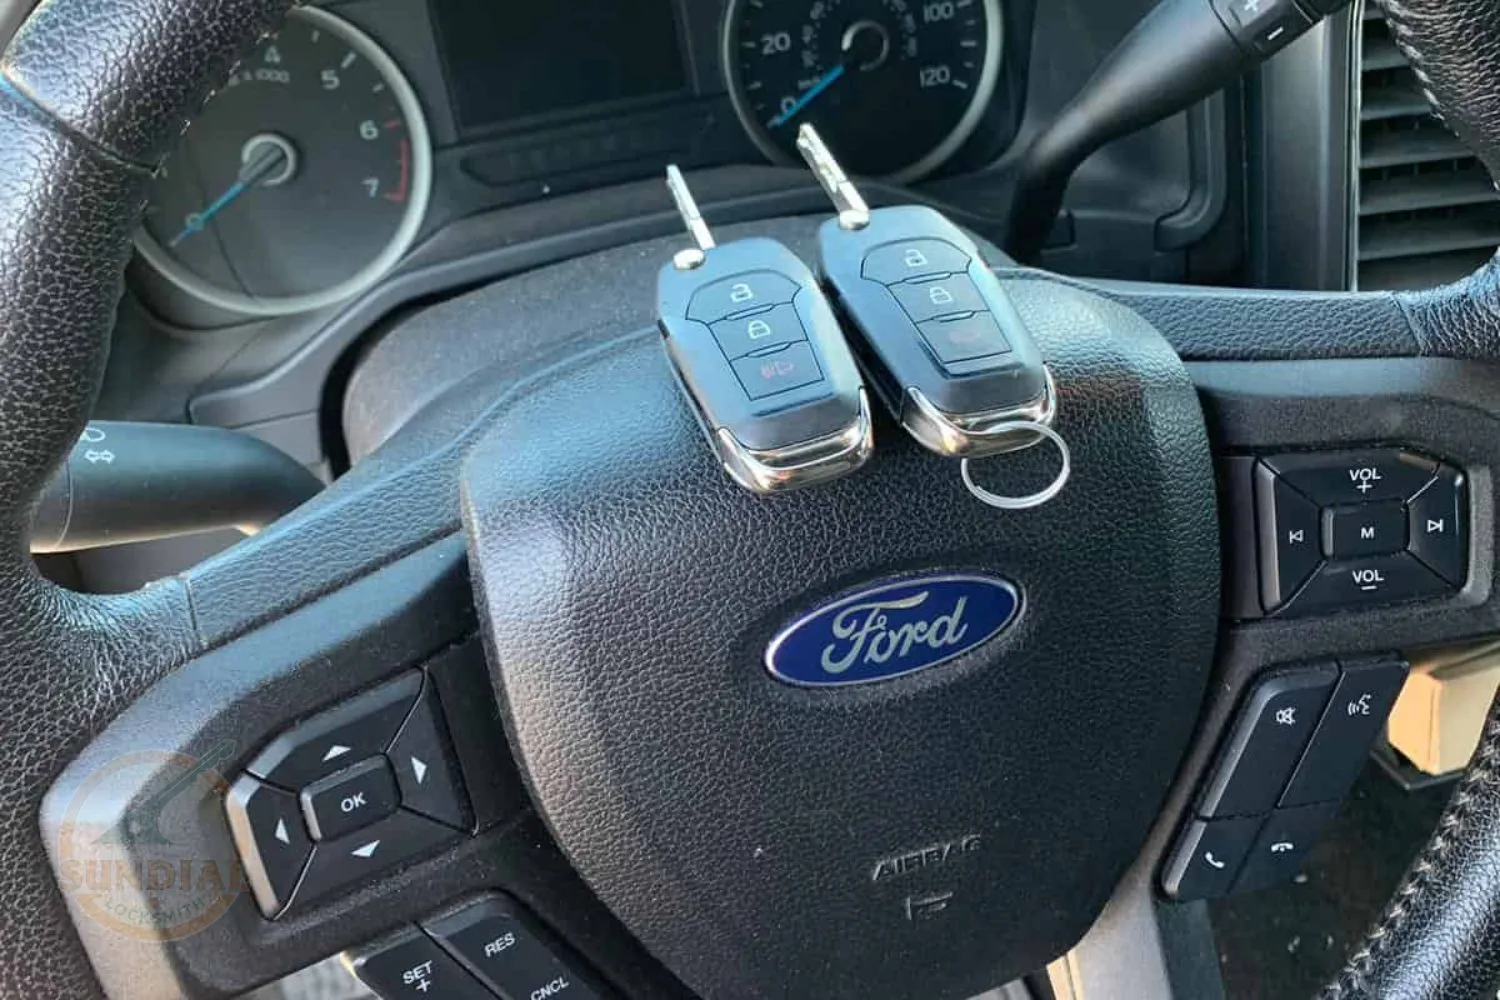 Two Ford car keys placed on a Ford vehicle's steering wheel with the brand logo and control buttons.